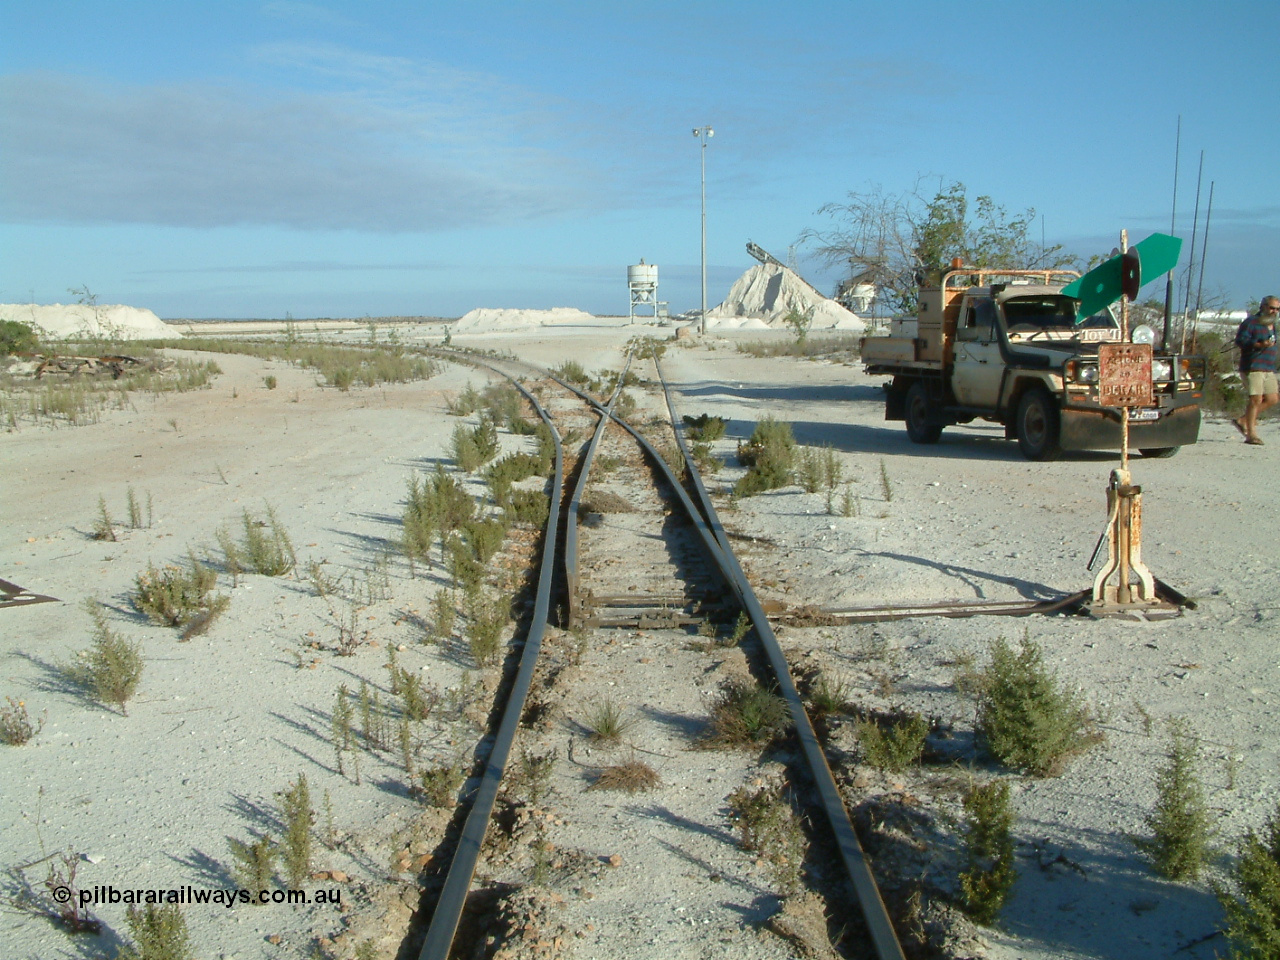 030414 163800
Kevin, , the points for the mainline to Penong Junction (Ceduna) with that line curving away to the left, straight ahead is the former gypsum loading bins.
